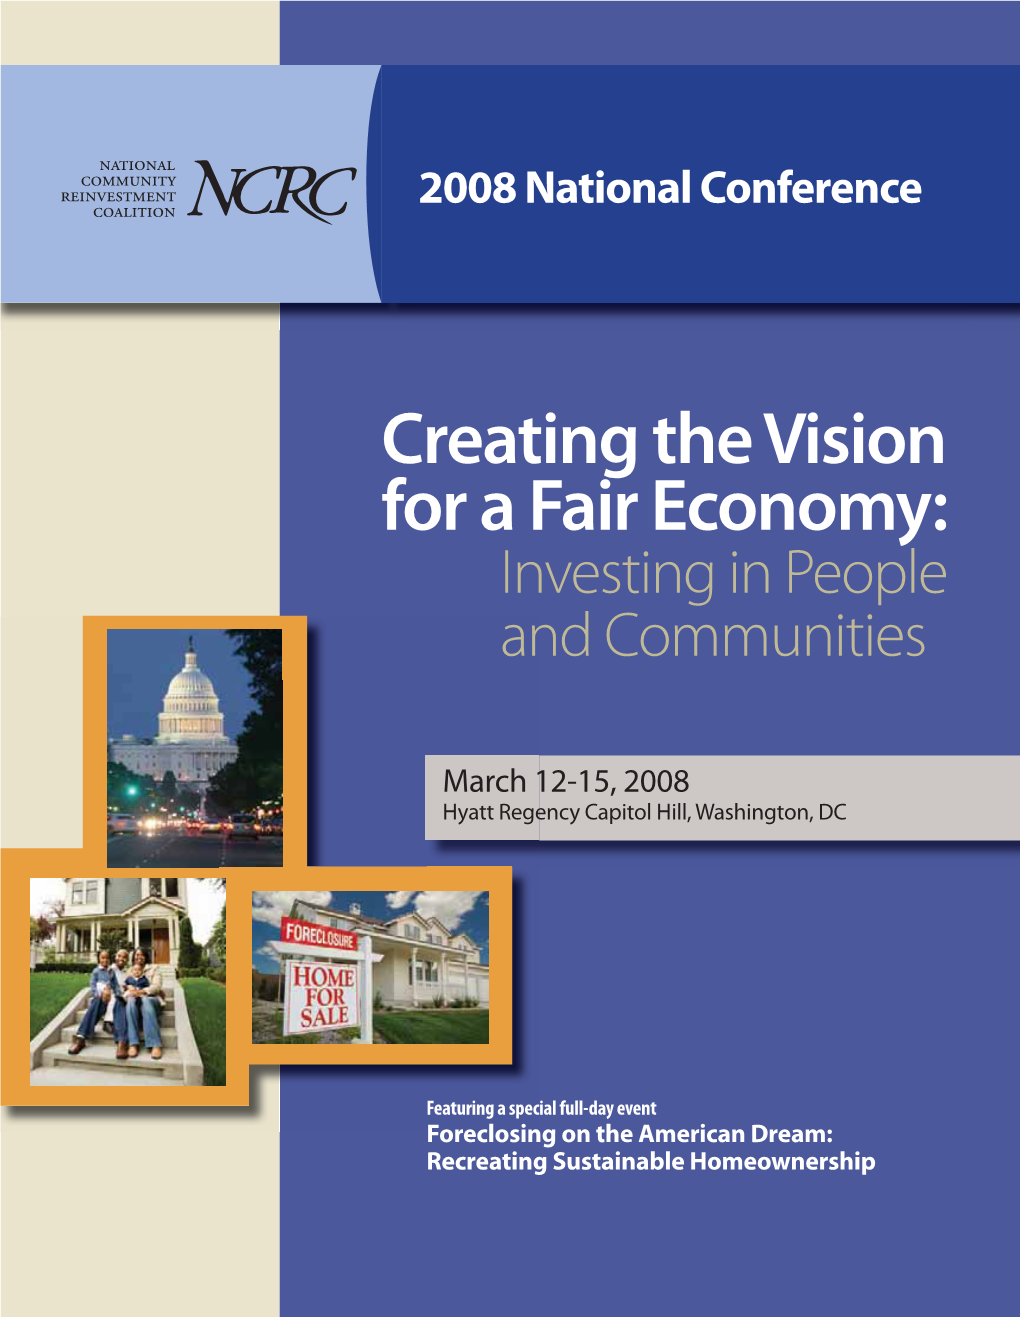 Creating the Vision for a Fair Economy: Investing in People and Communities